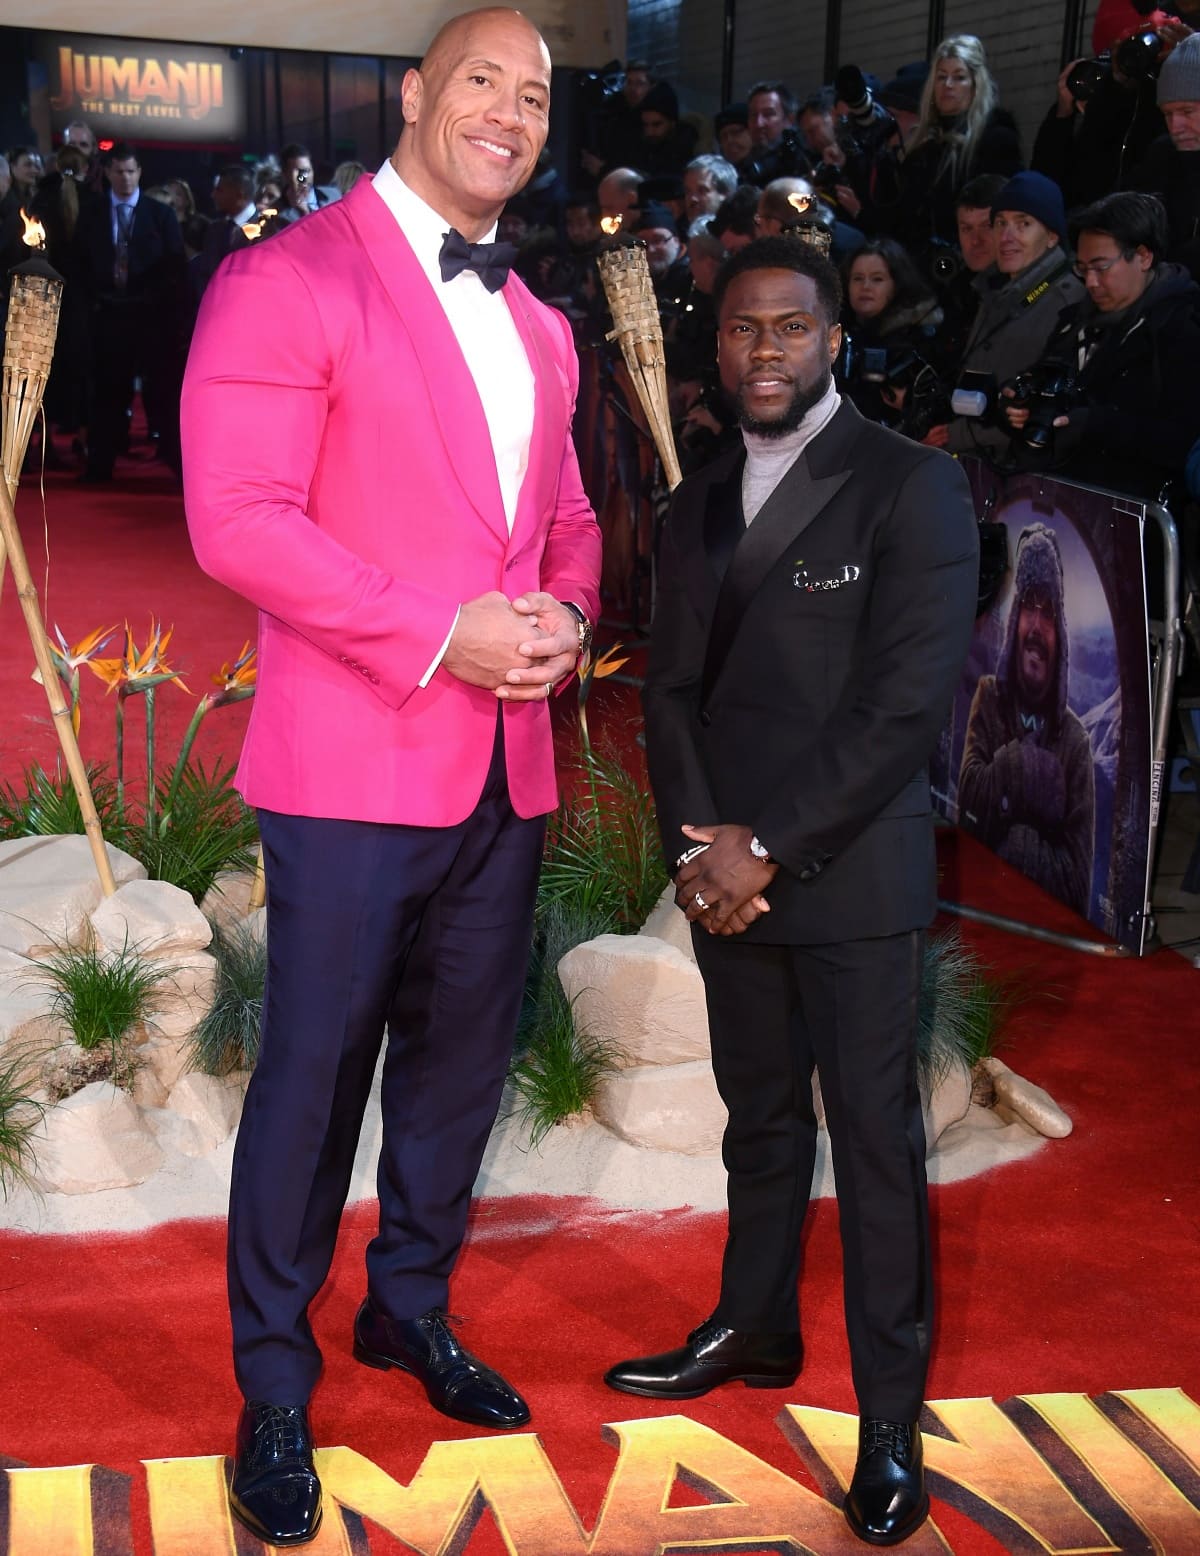 Dwayne “The Rock” Johnson and Kevin Hart at the premiere of Jumanji: The Next Level